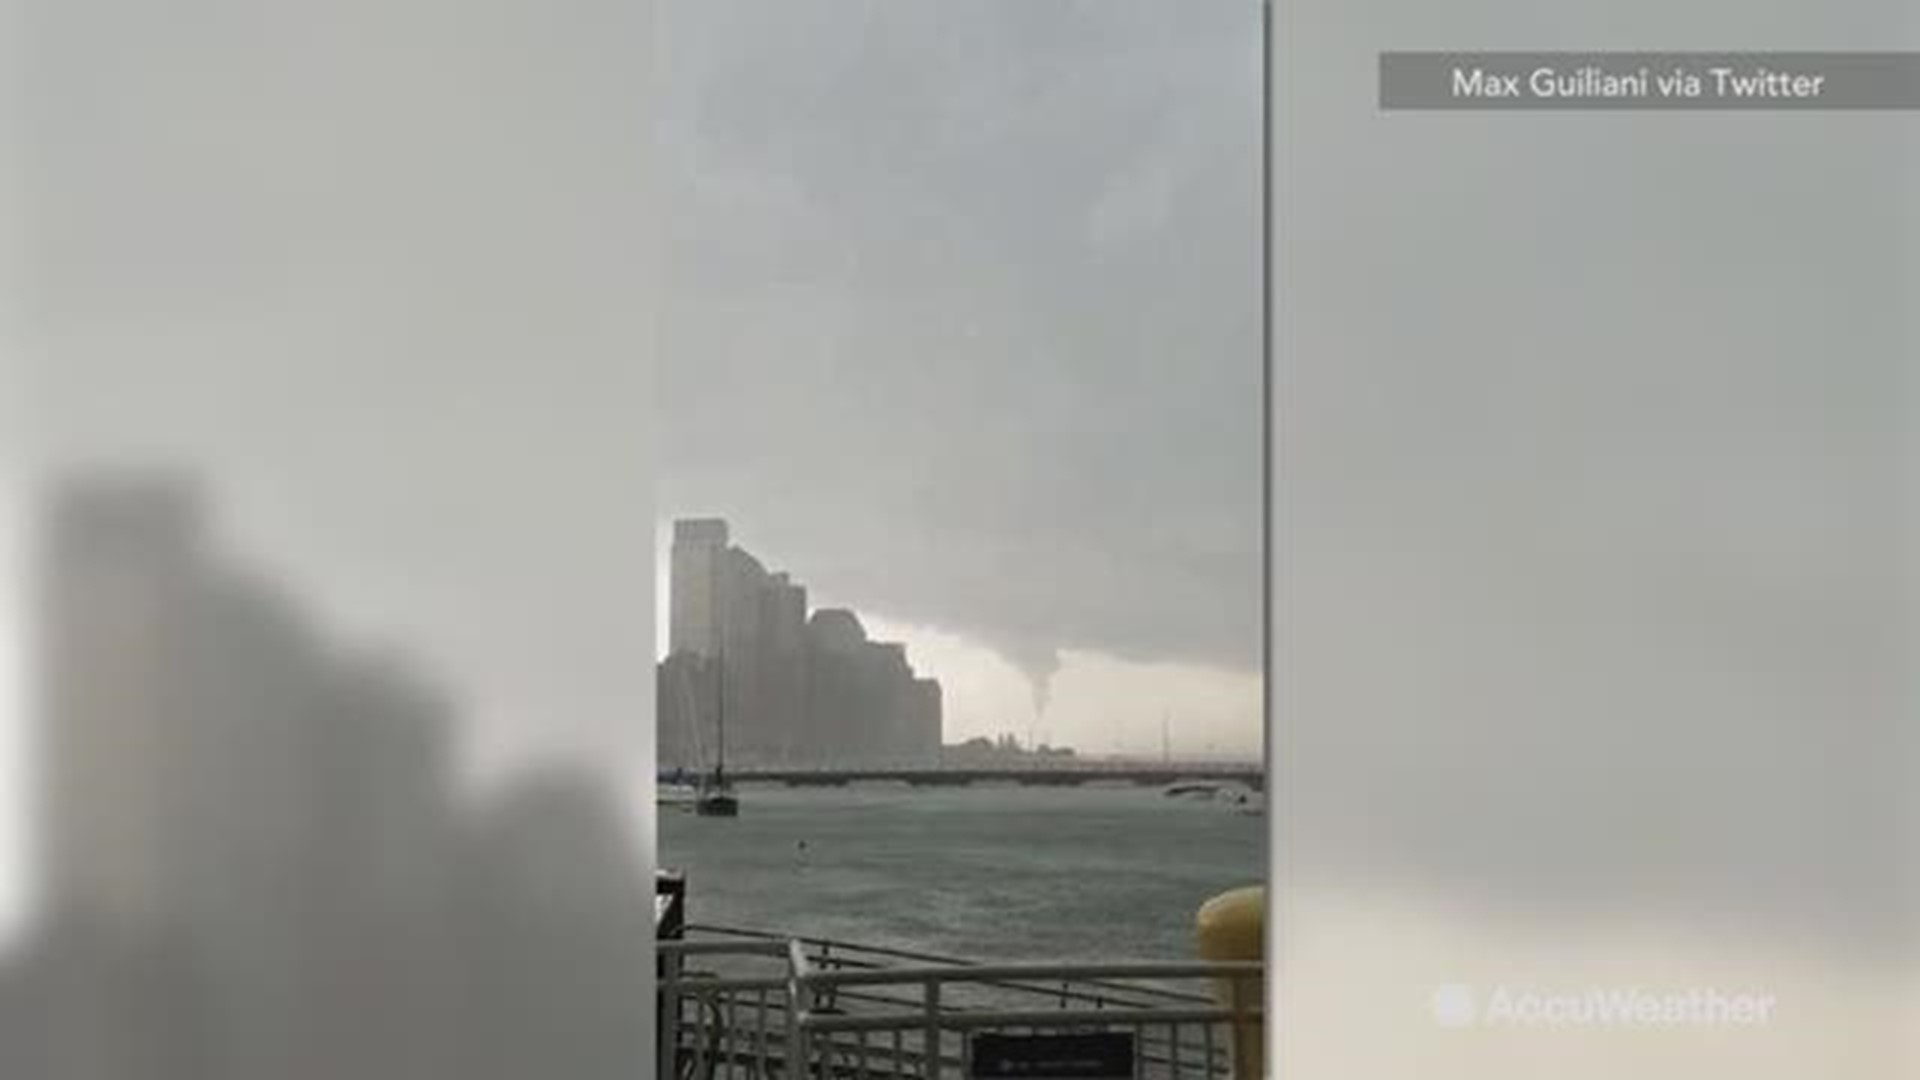 Confirmed funnel cloud spotted in New York City, as storms rolled through the area on July 17.